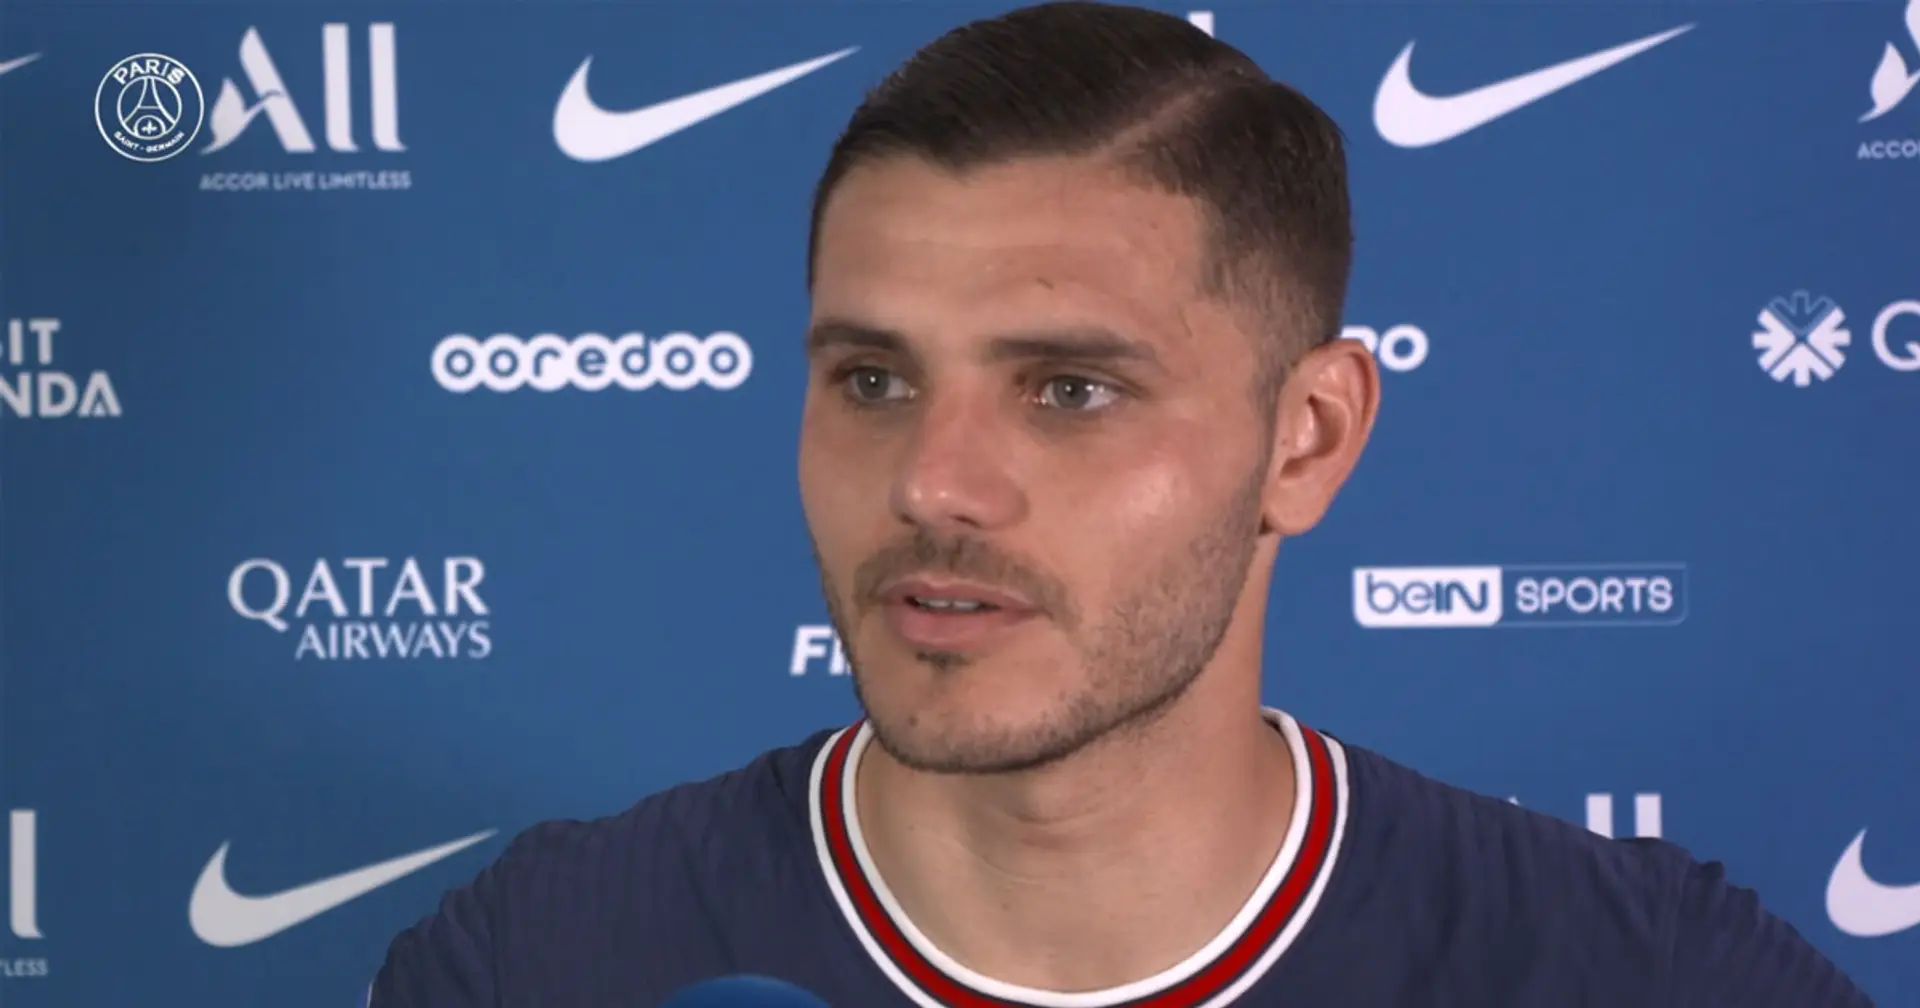 'It will only get better': Mauro Icardi reacts to Strasbourg win